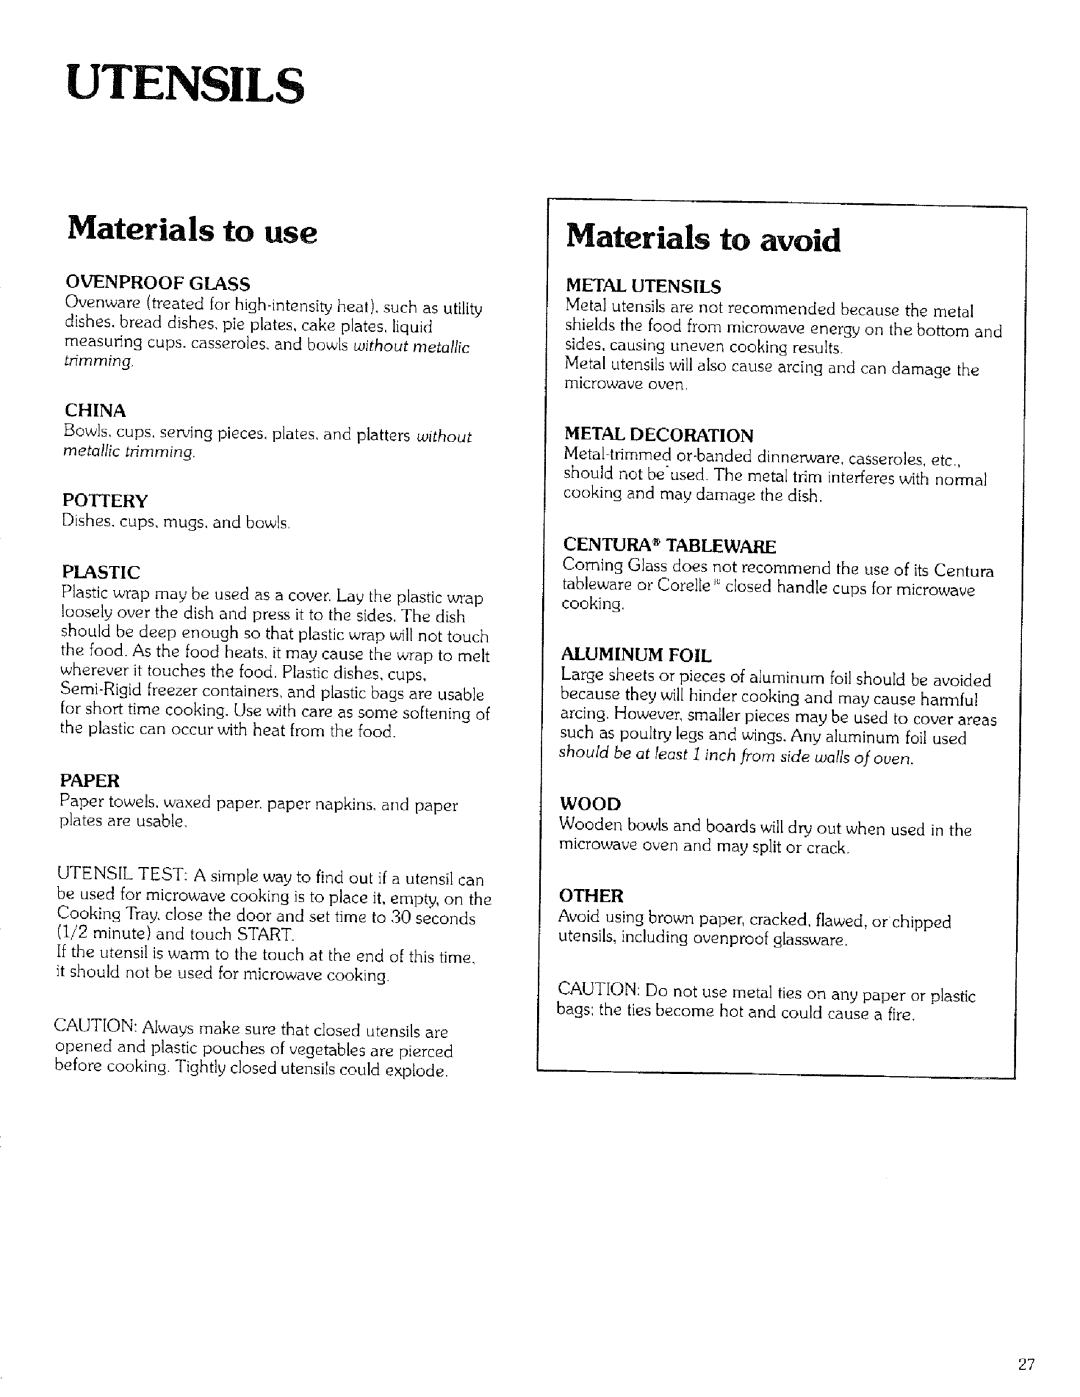 Kenmore 99721 manual Utensils, Materials to use, Materials to avoid 